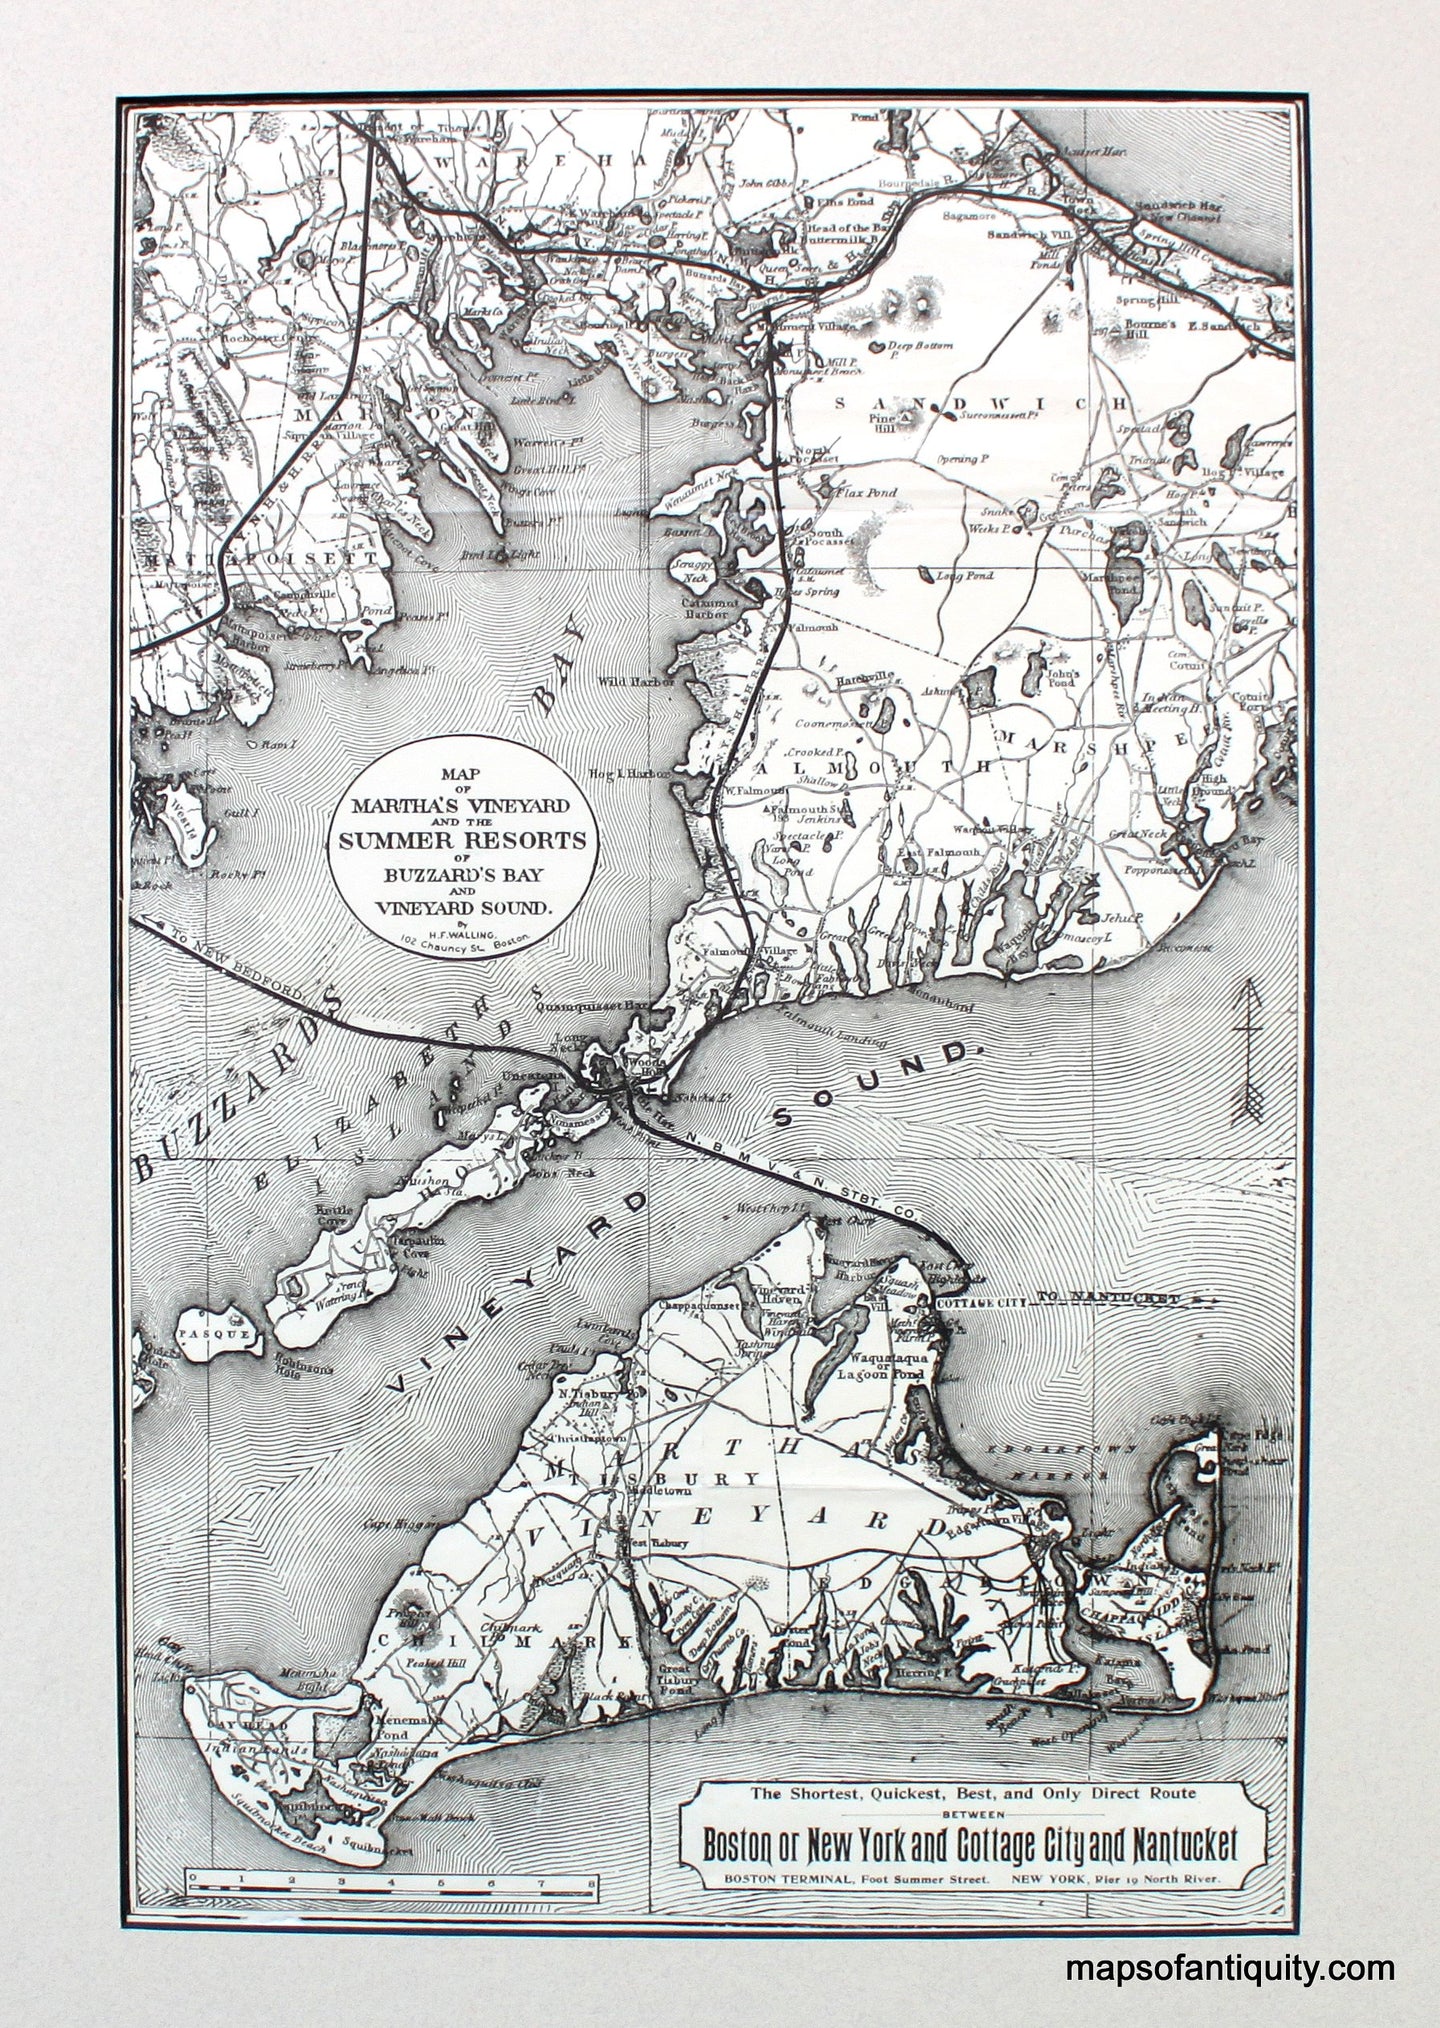 Antique-Black-and-White-Map-Old-Colony-Line-Map-of-Martha's-Vineyard-and-the-Summer-Resorts-of-Buzzard's-Bay-and-Vineyard-Sound.-**********-US-Massachusetts-Cape-Cod-and-Islands-c.-1871-Walling-Maps-Of-Antiquity